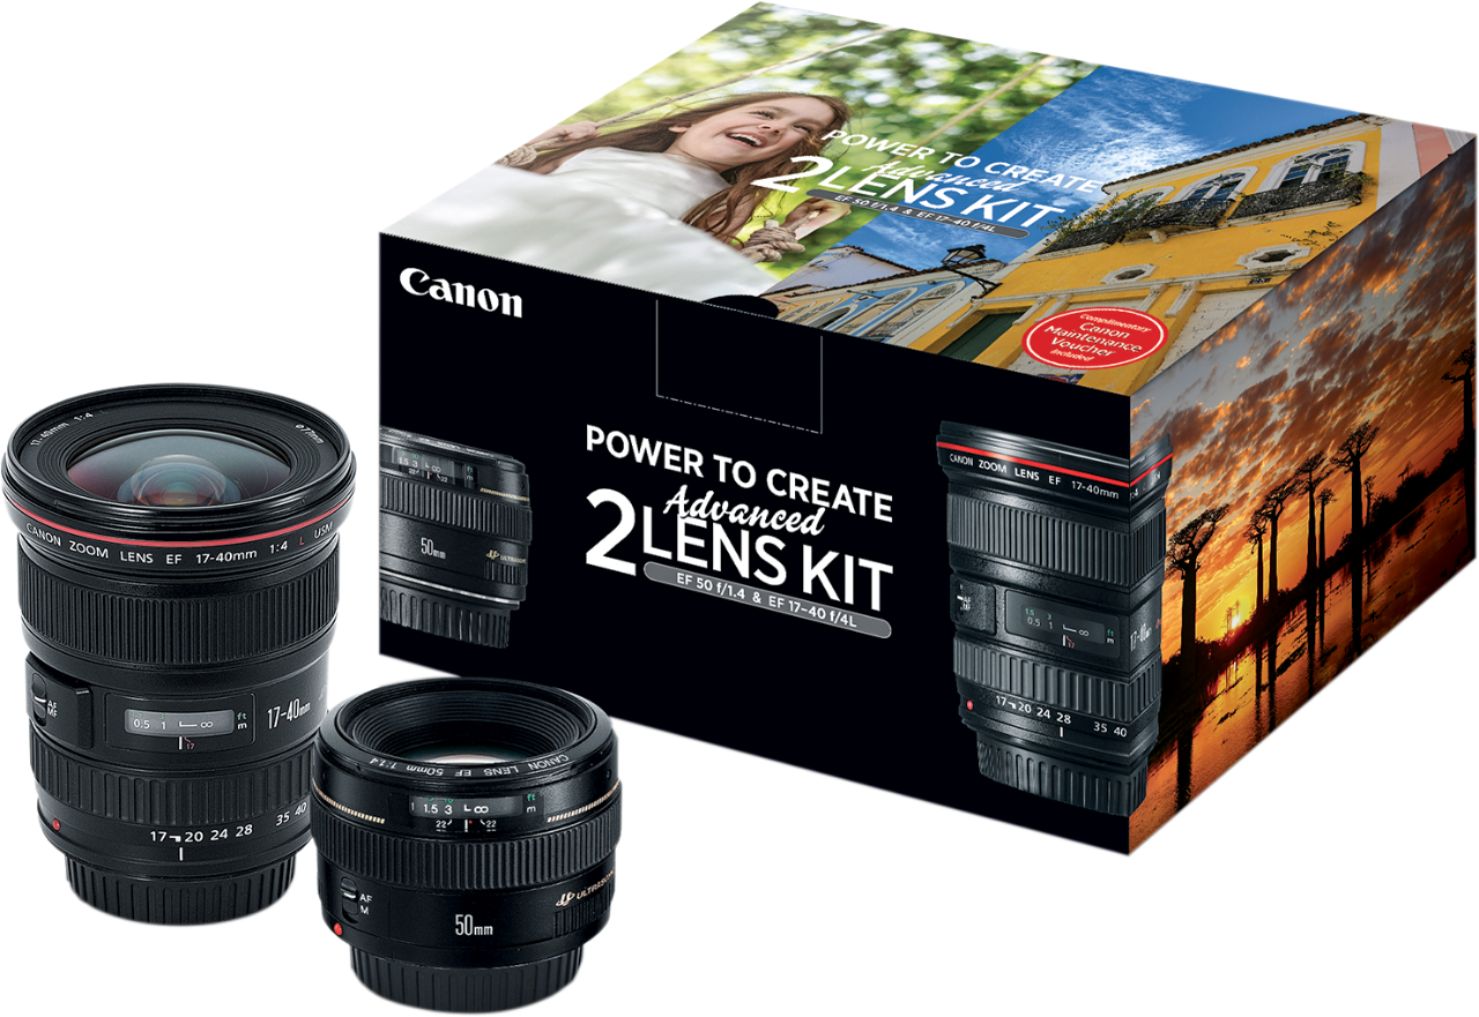 Questions and Answers: Canon EF 17-40mm f/4L USM Wide-Angle Zoom